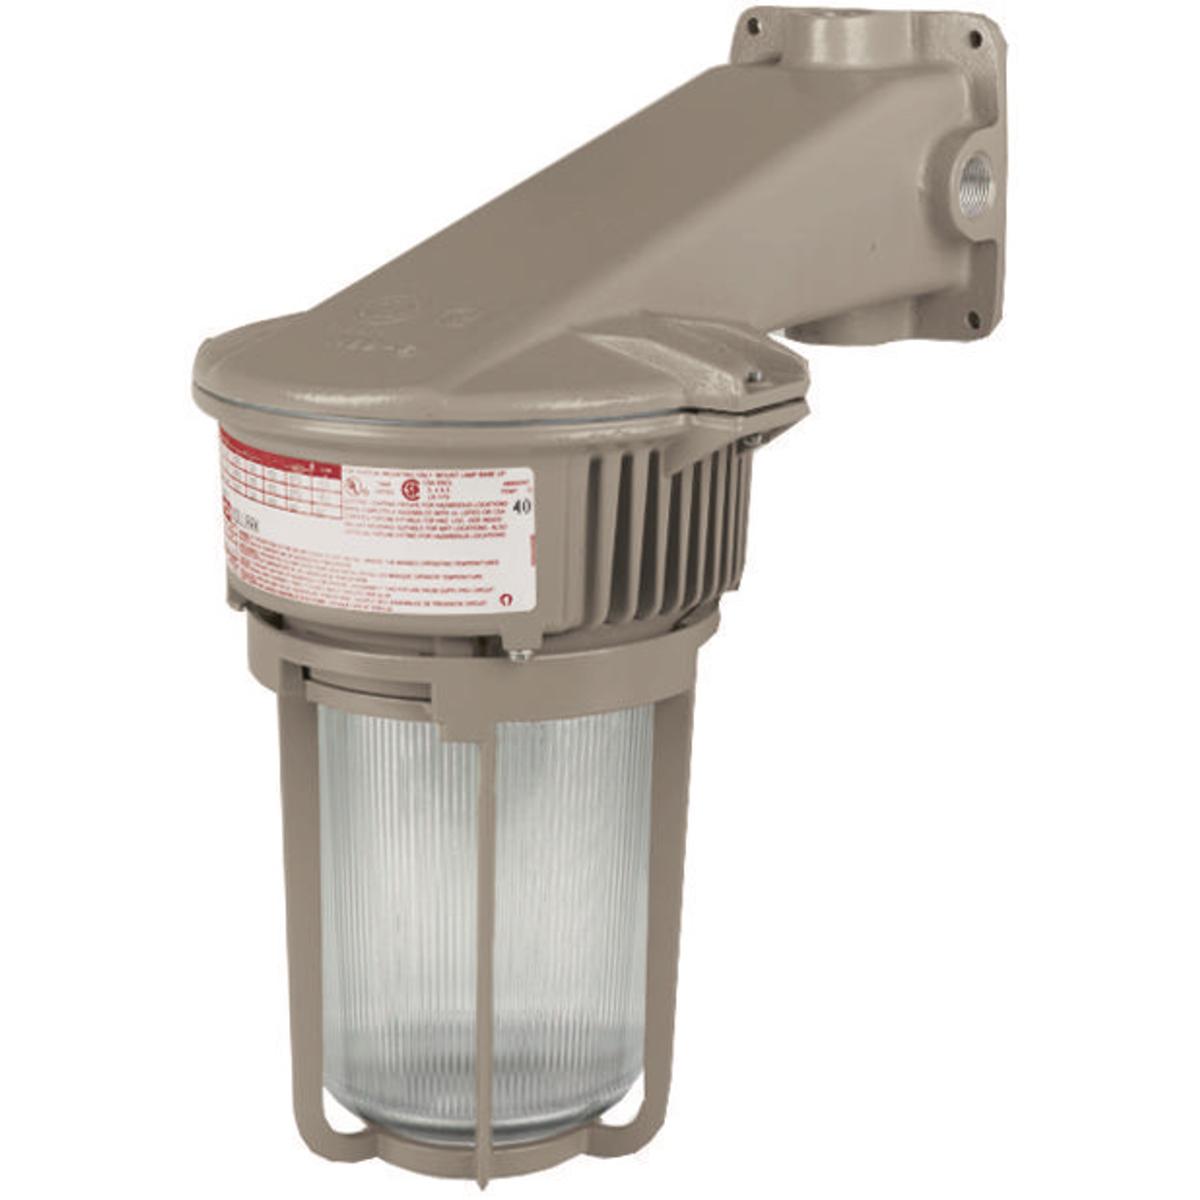 Hubbell MBL151-GGB2 NR 150W HPS Fluorescent 120V 3/4" Wall Mount with Globe and Guard- Ex nR  ; Ballast tank and splice box – corrosion resistant copper-free aluminum alloy ; Baked powder epoxy/polyester finish, electrostatically applied for complete, uniform corrosion protecti